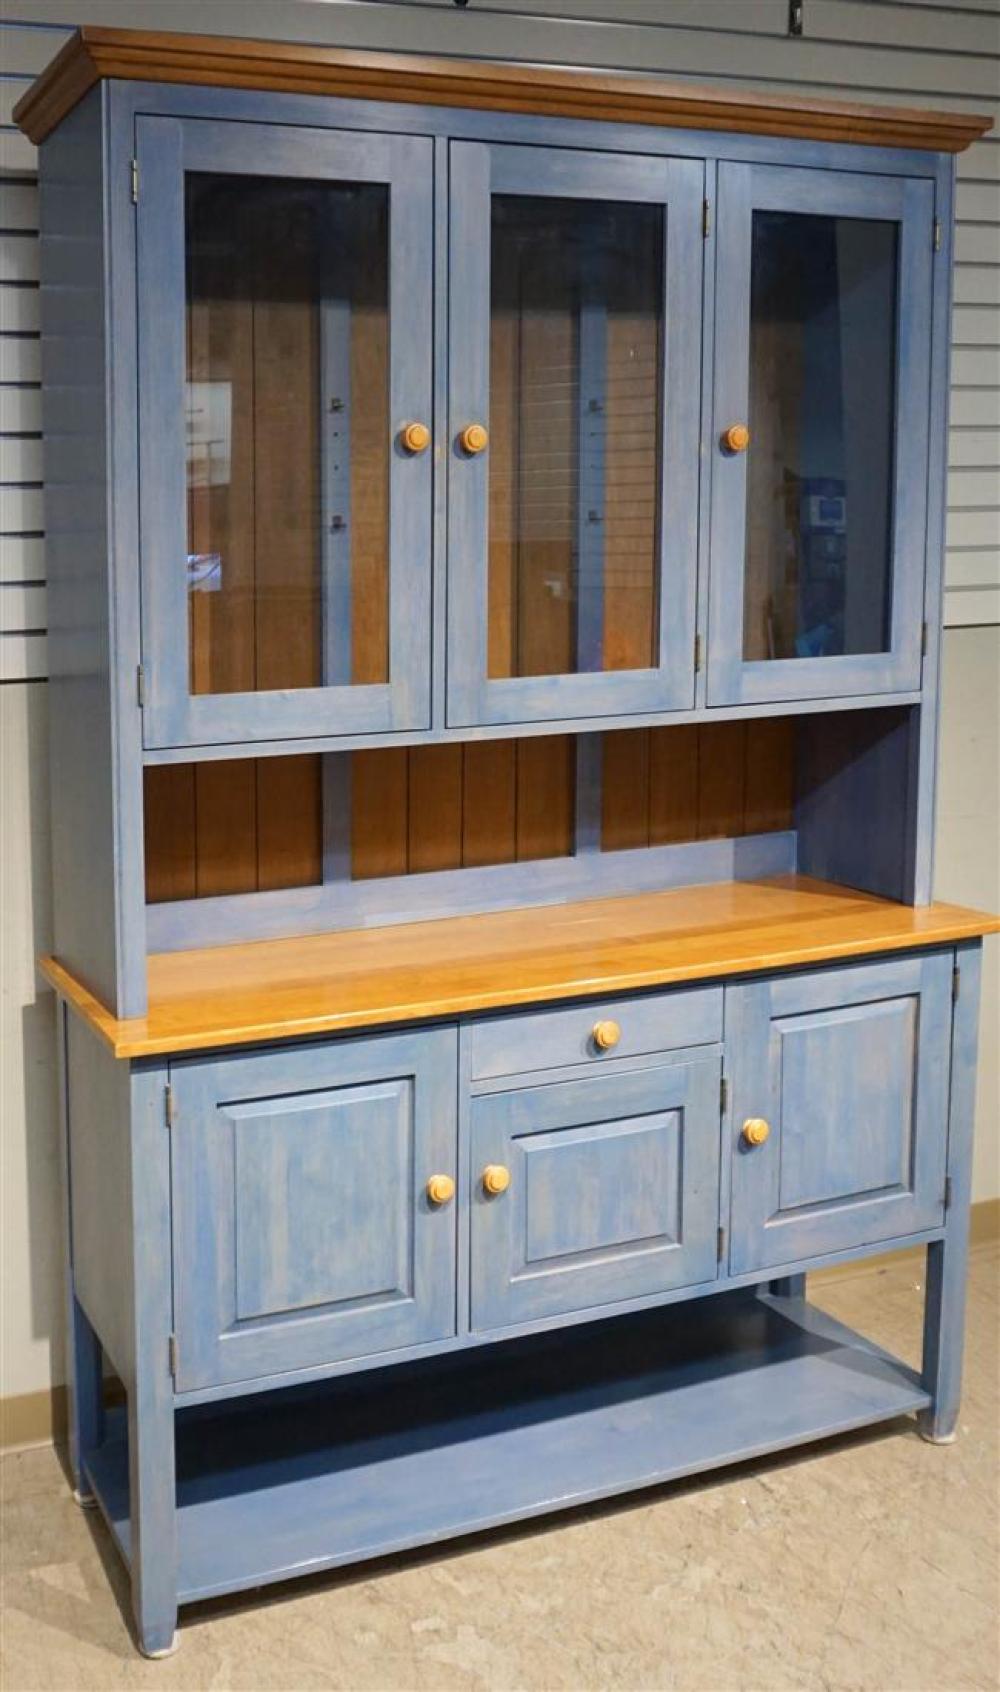 ETHAN ALLEN BLUE STAINED MAPLE 322e86